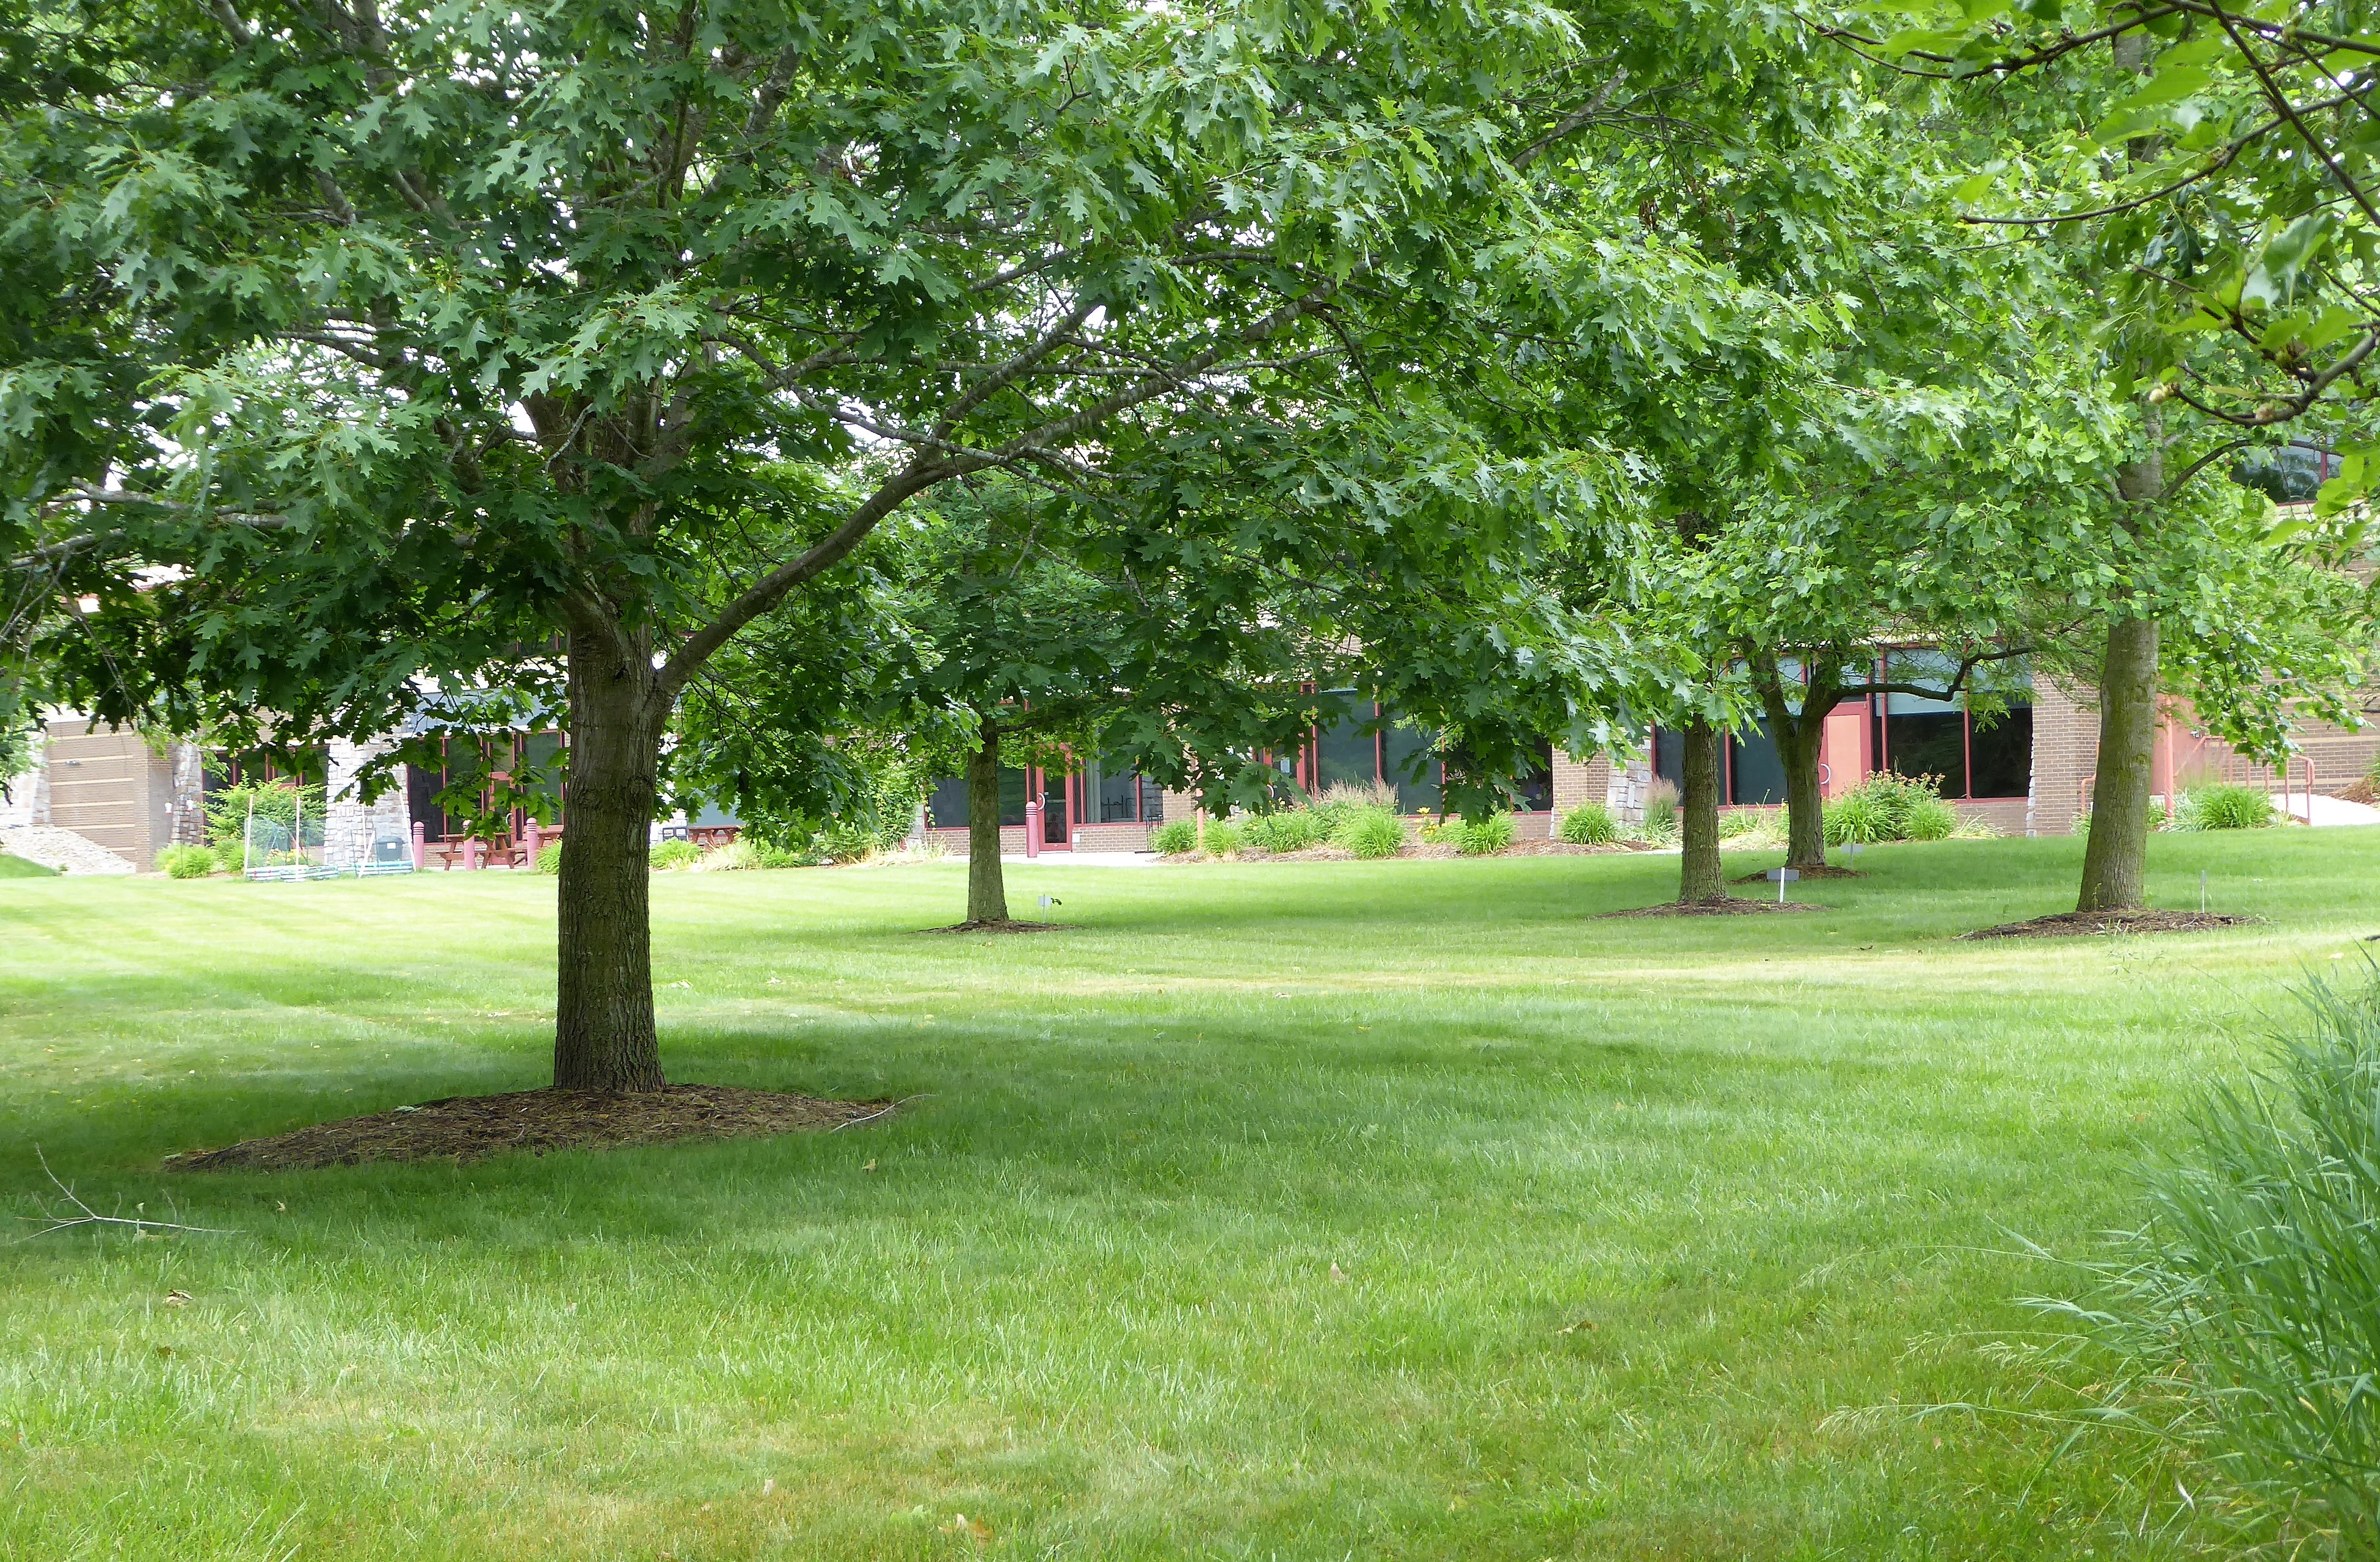 Trees in the library's backyard, with the library just barely visible in the background.